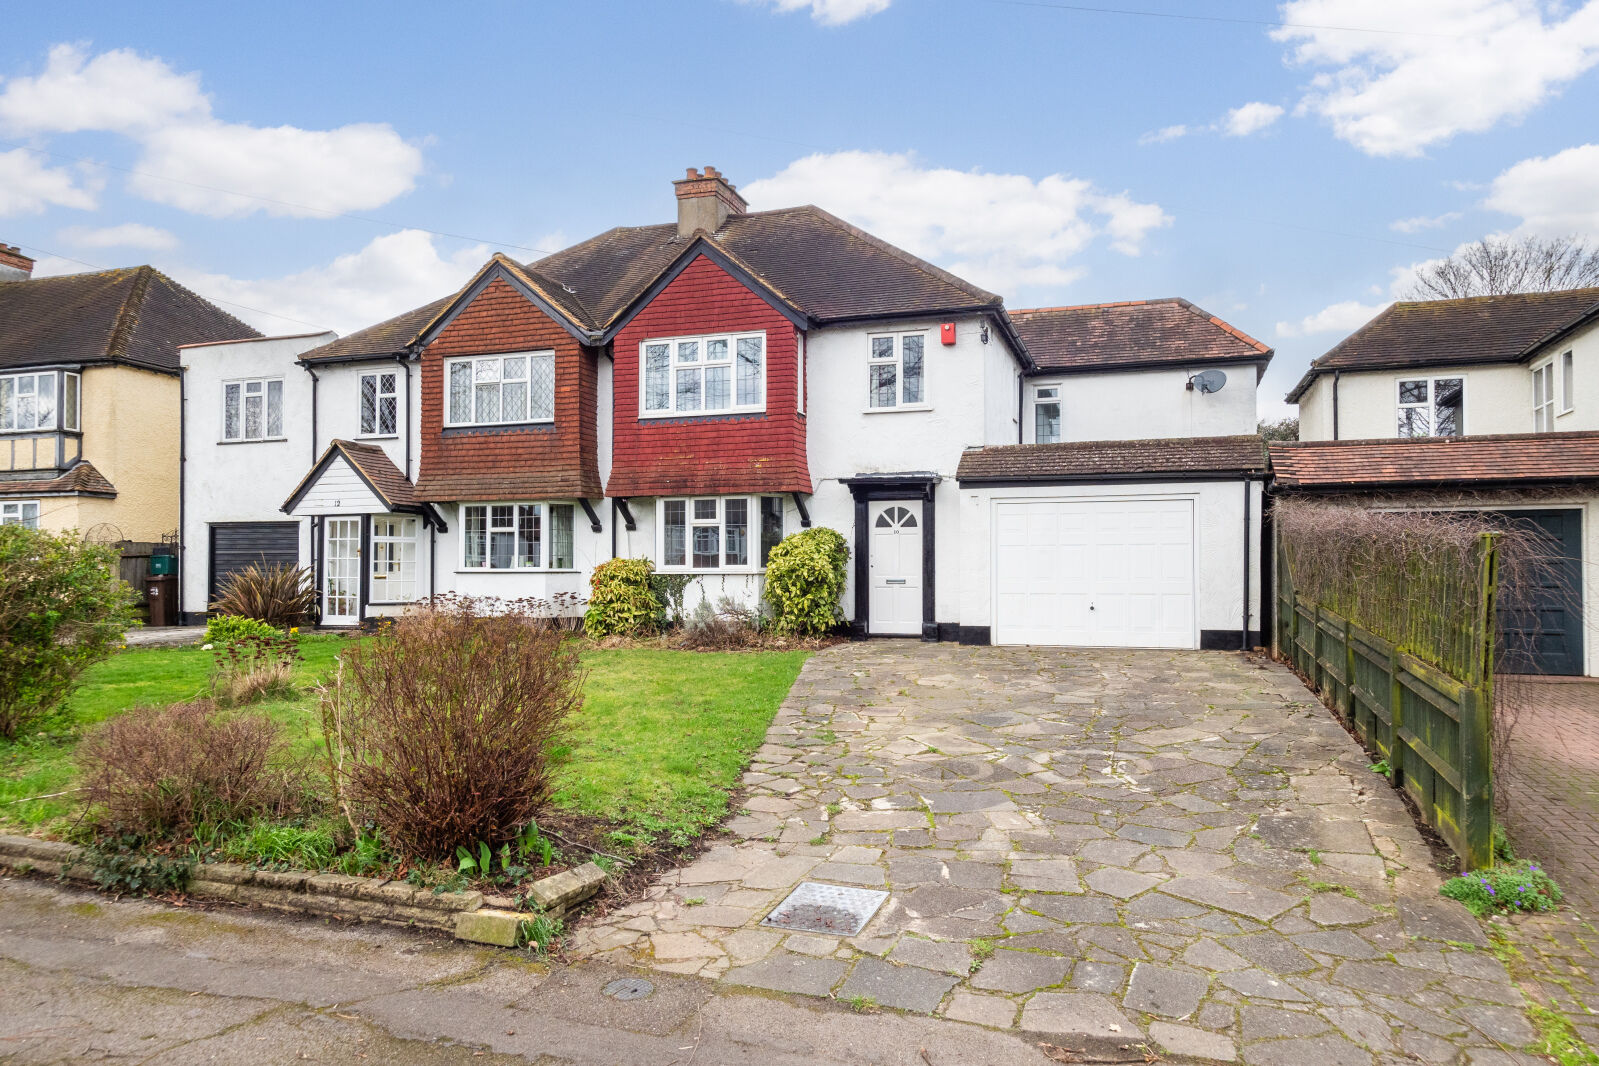 4 bedroom semi detached house to rent, Available now Fairway, Carshalton, SM5, main image